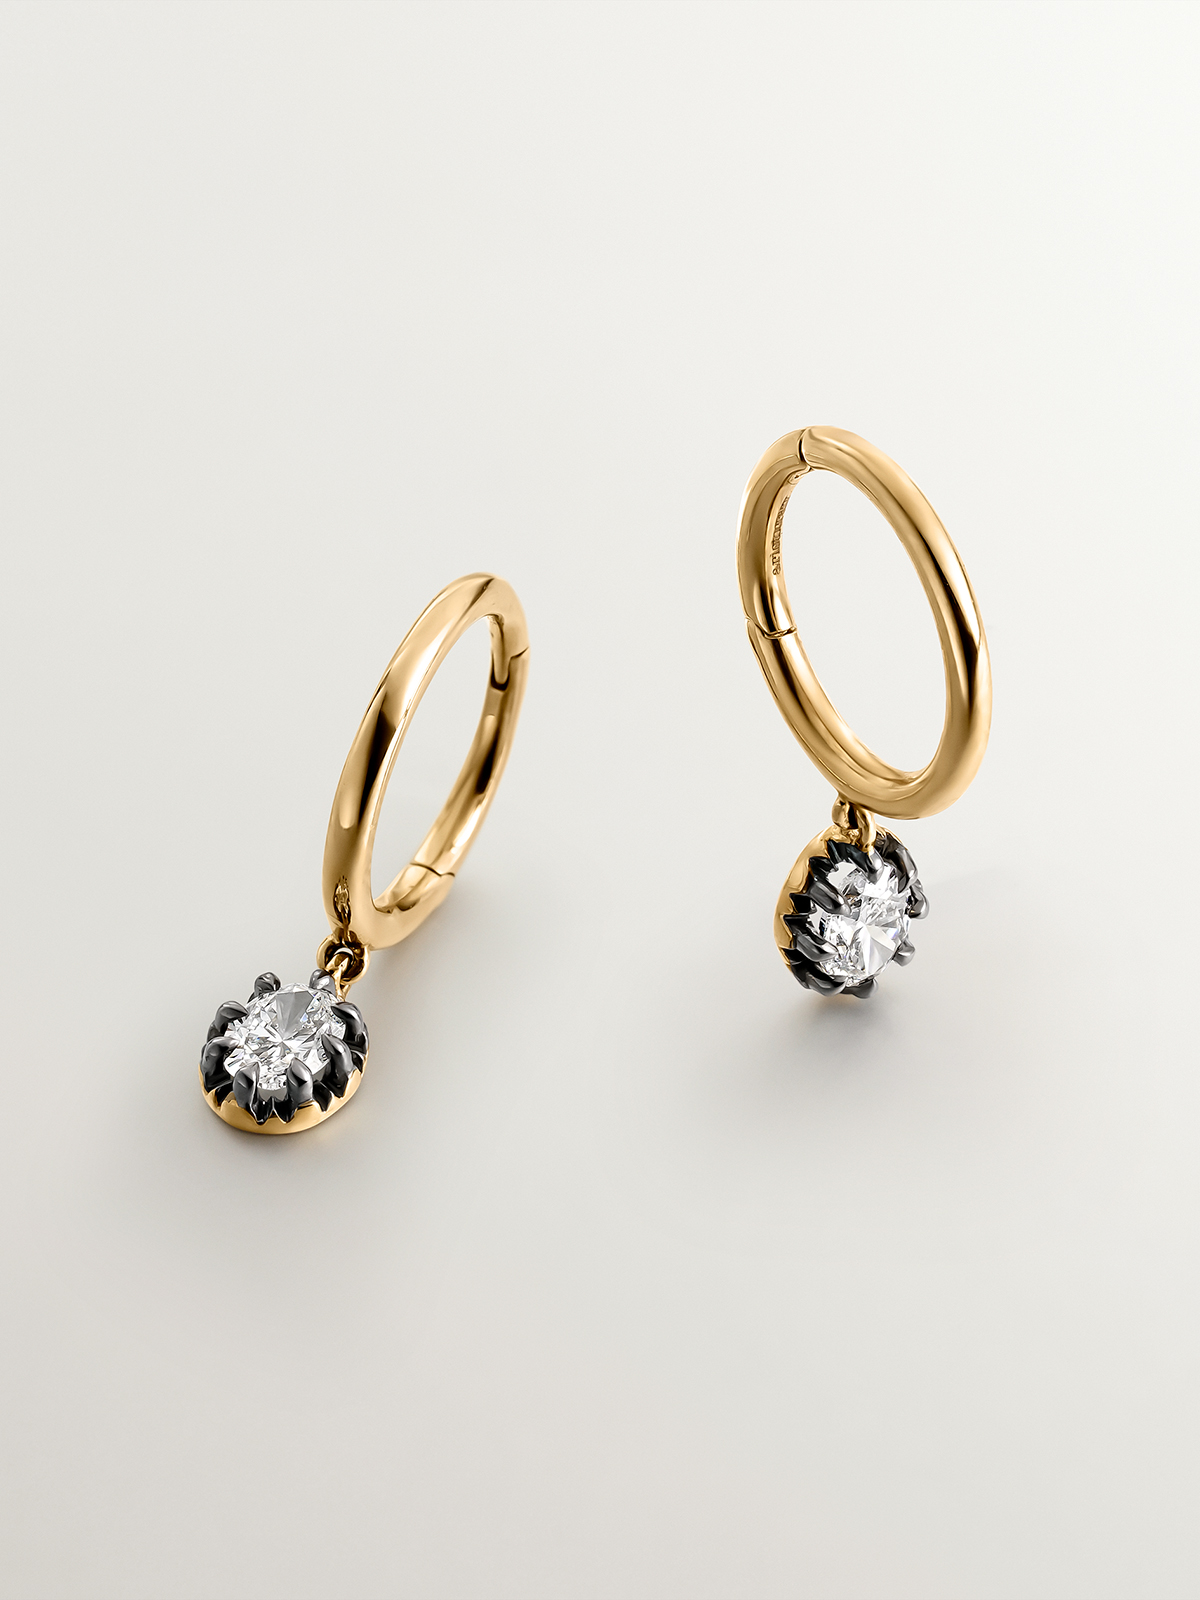 18K yellow gold earrings with aged effect and oval-cut diamonds